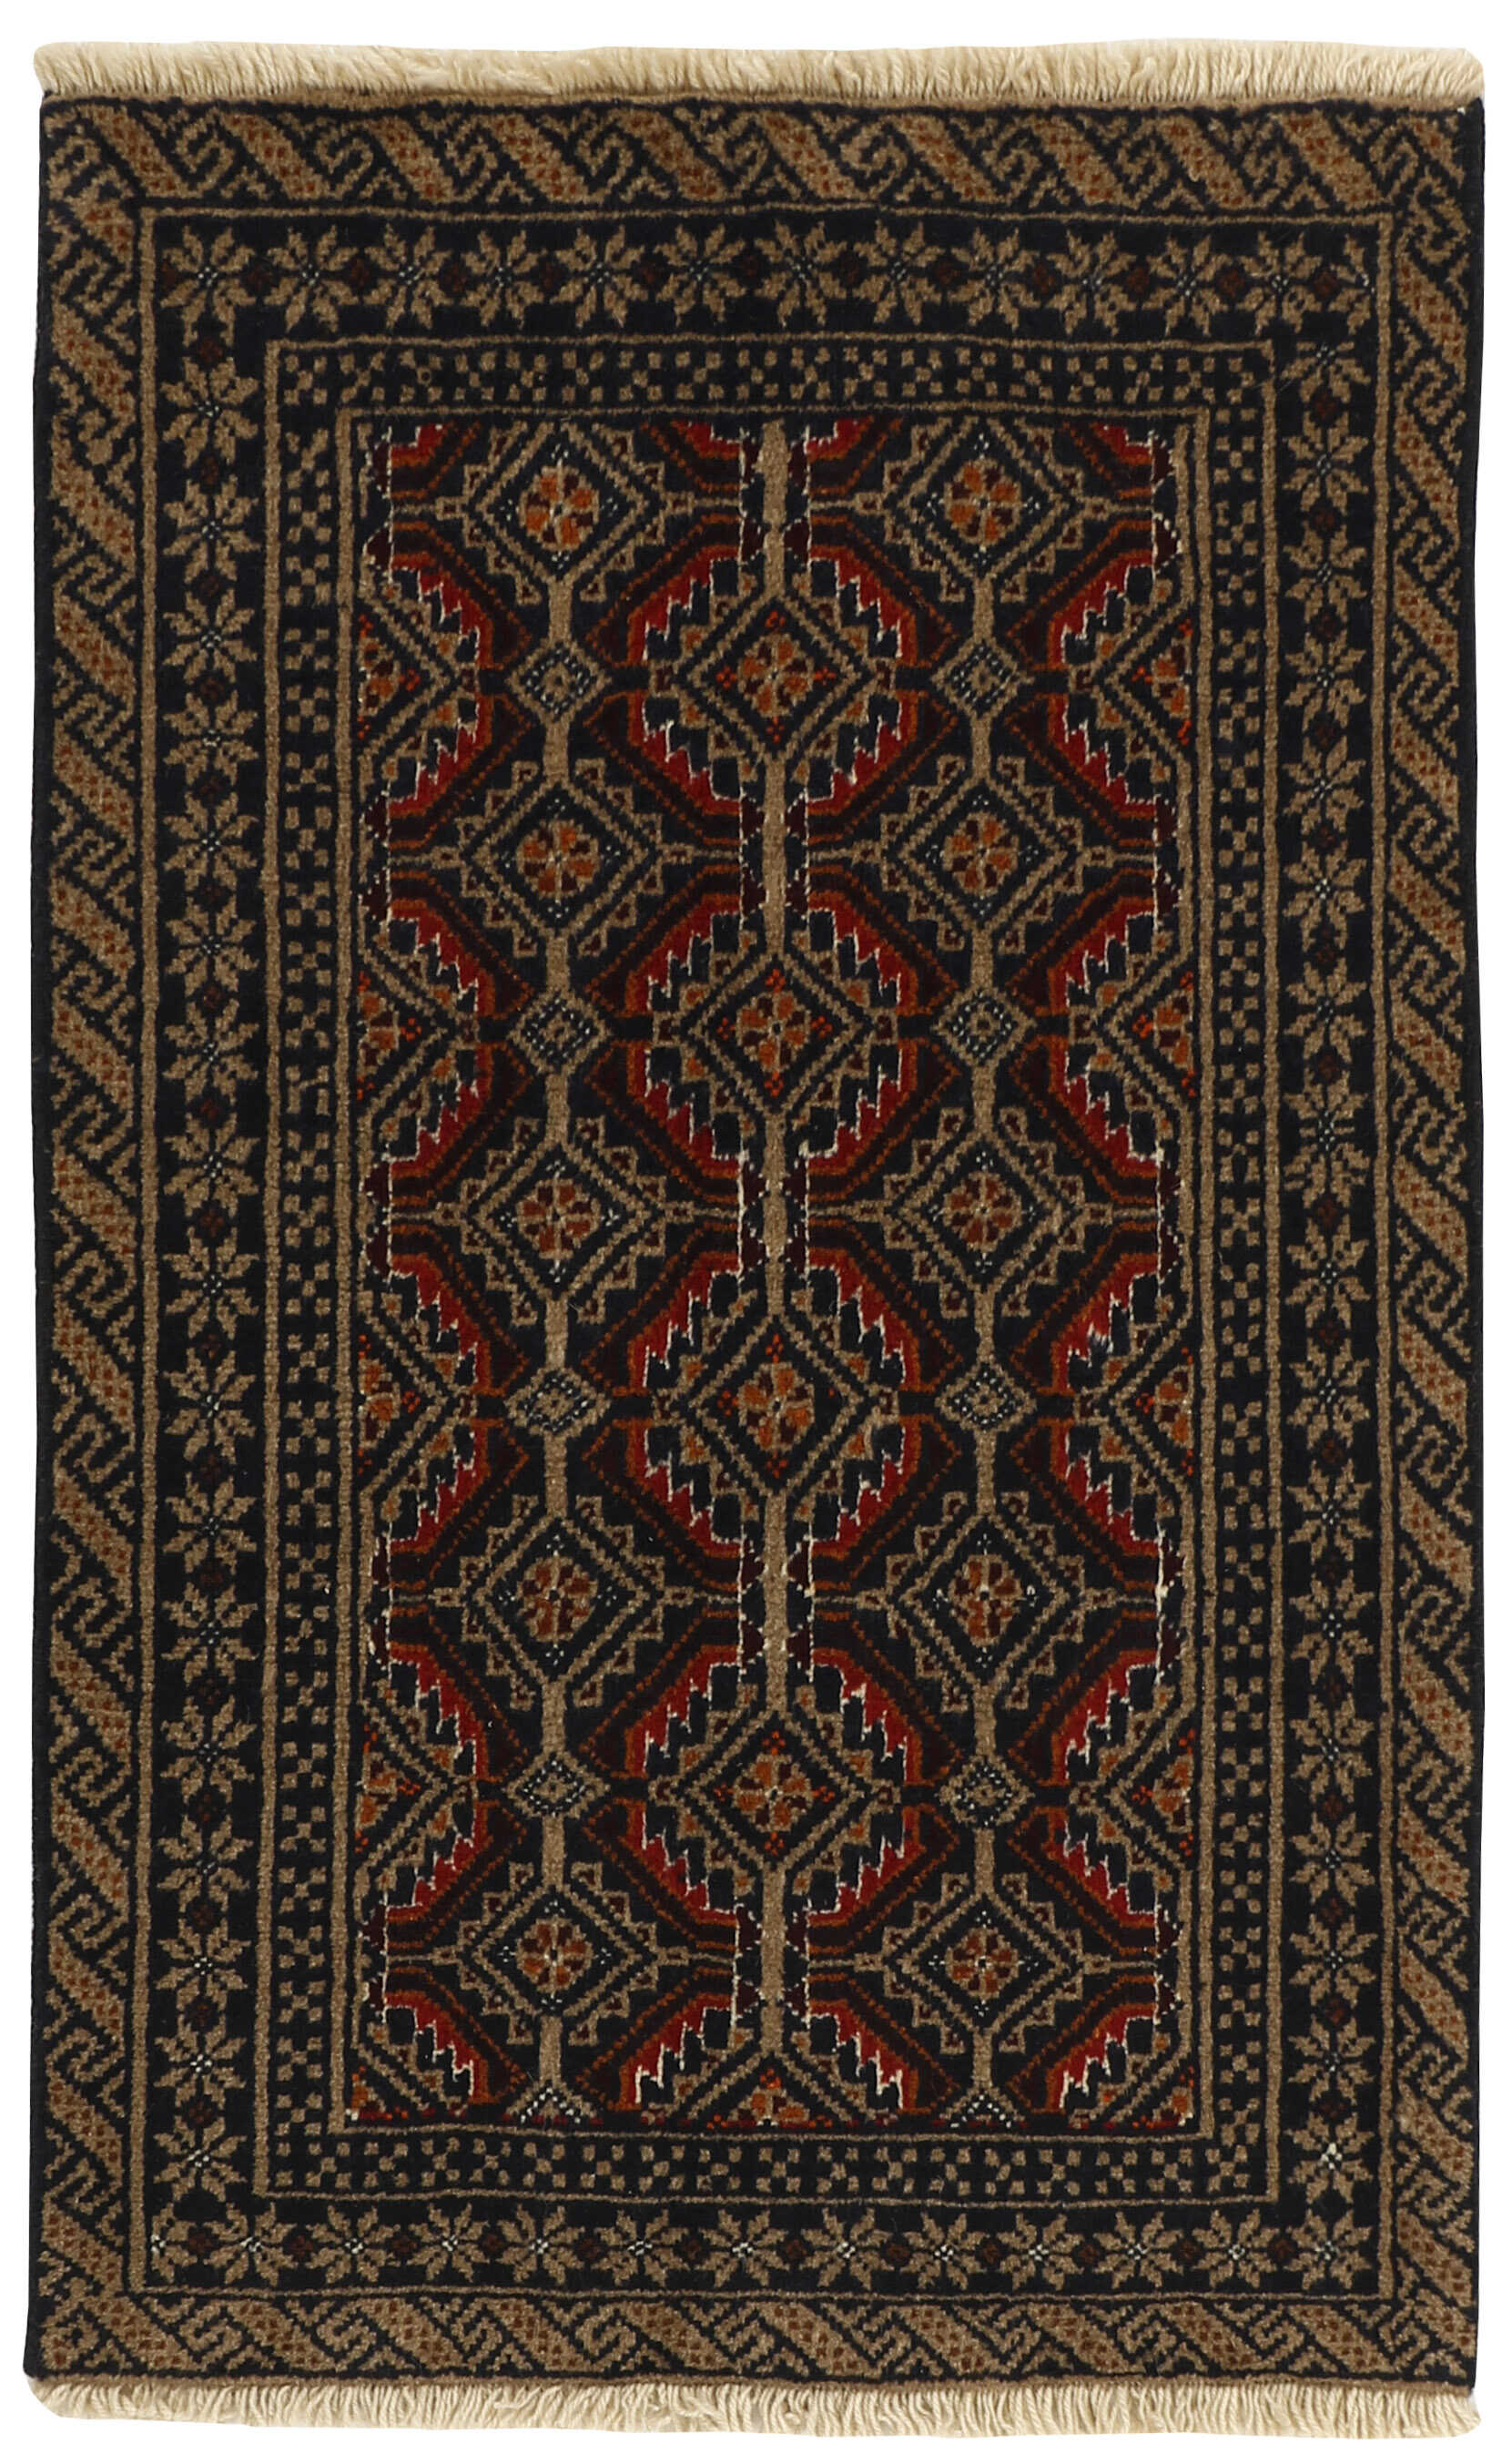 Brown Persian wool rug with traditional design